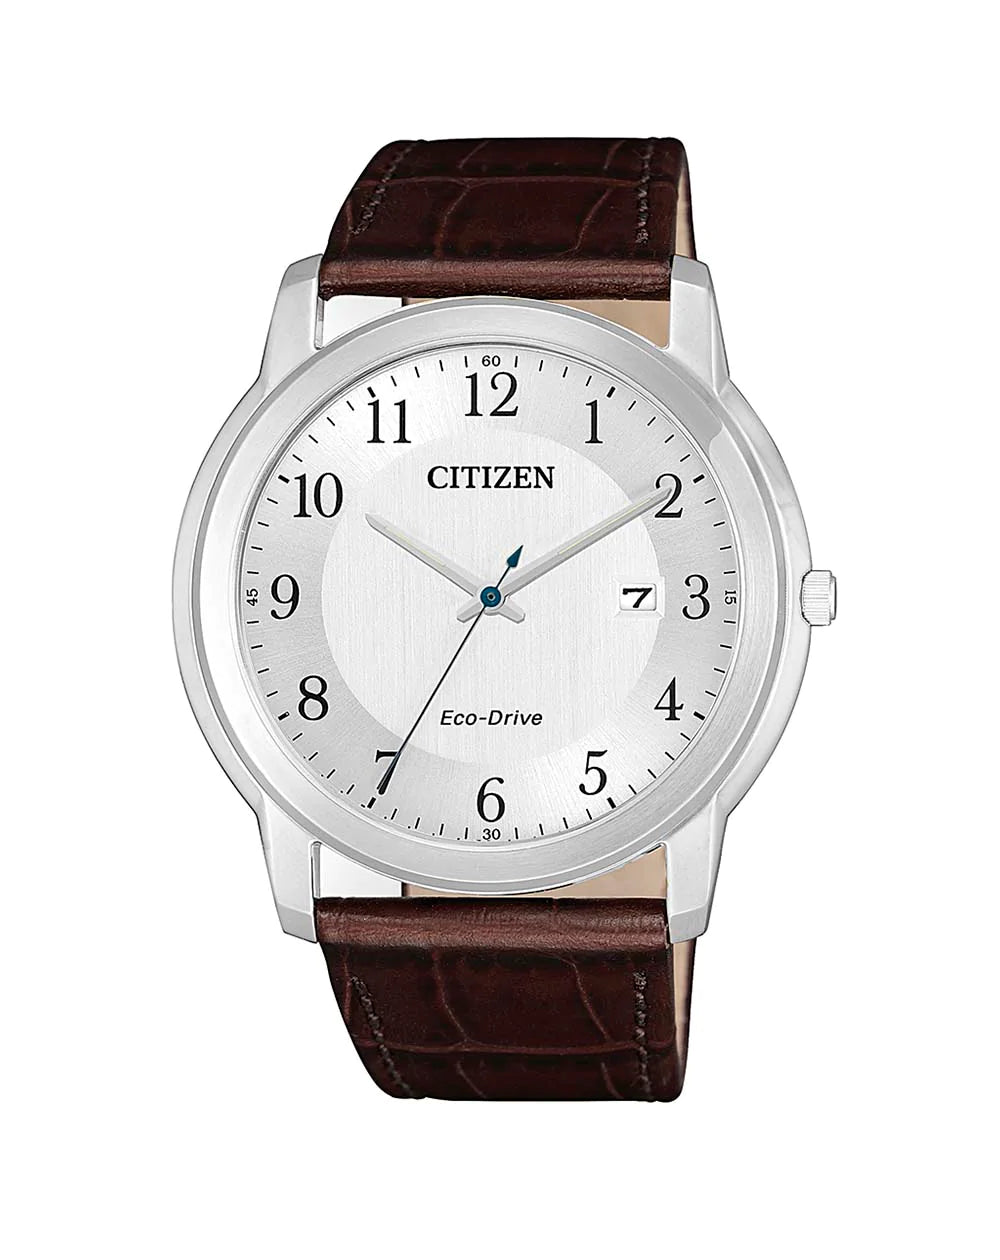 Gents Citizen Eco Drive with Leather Strap